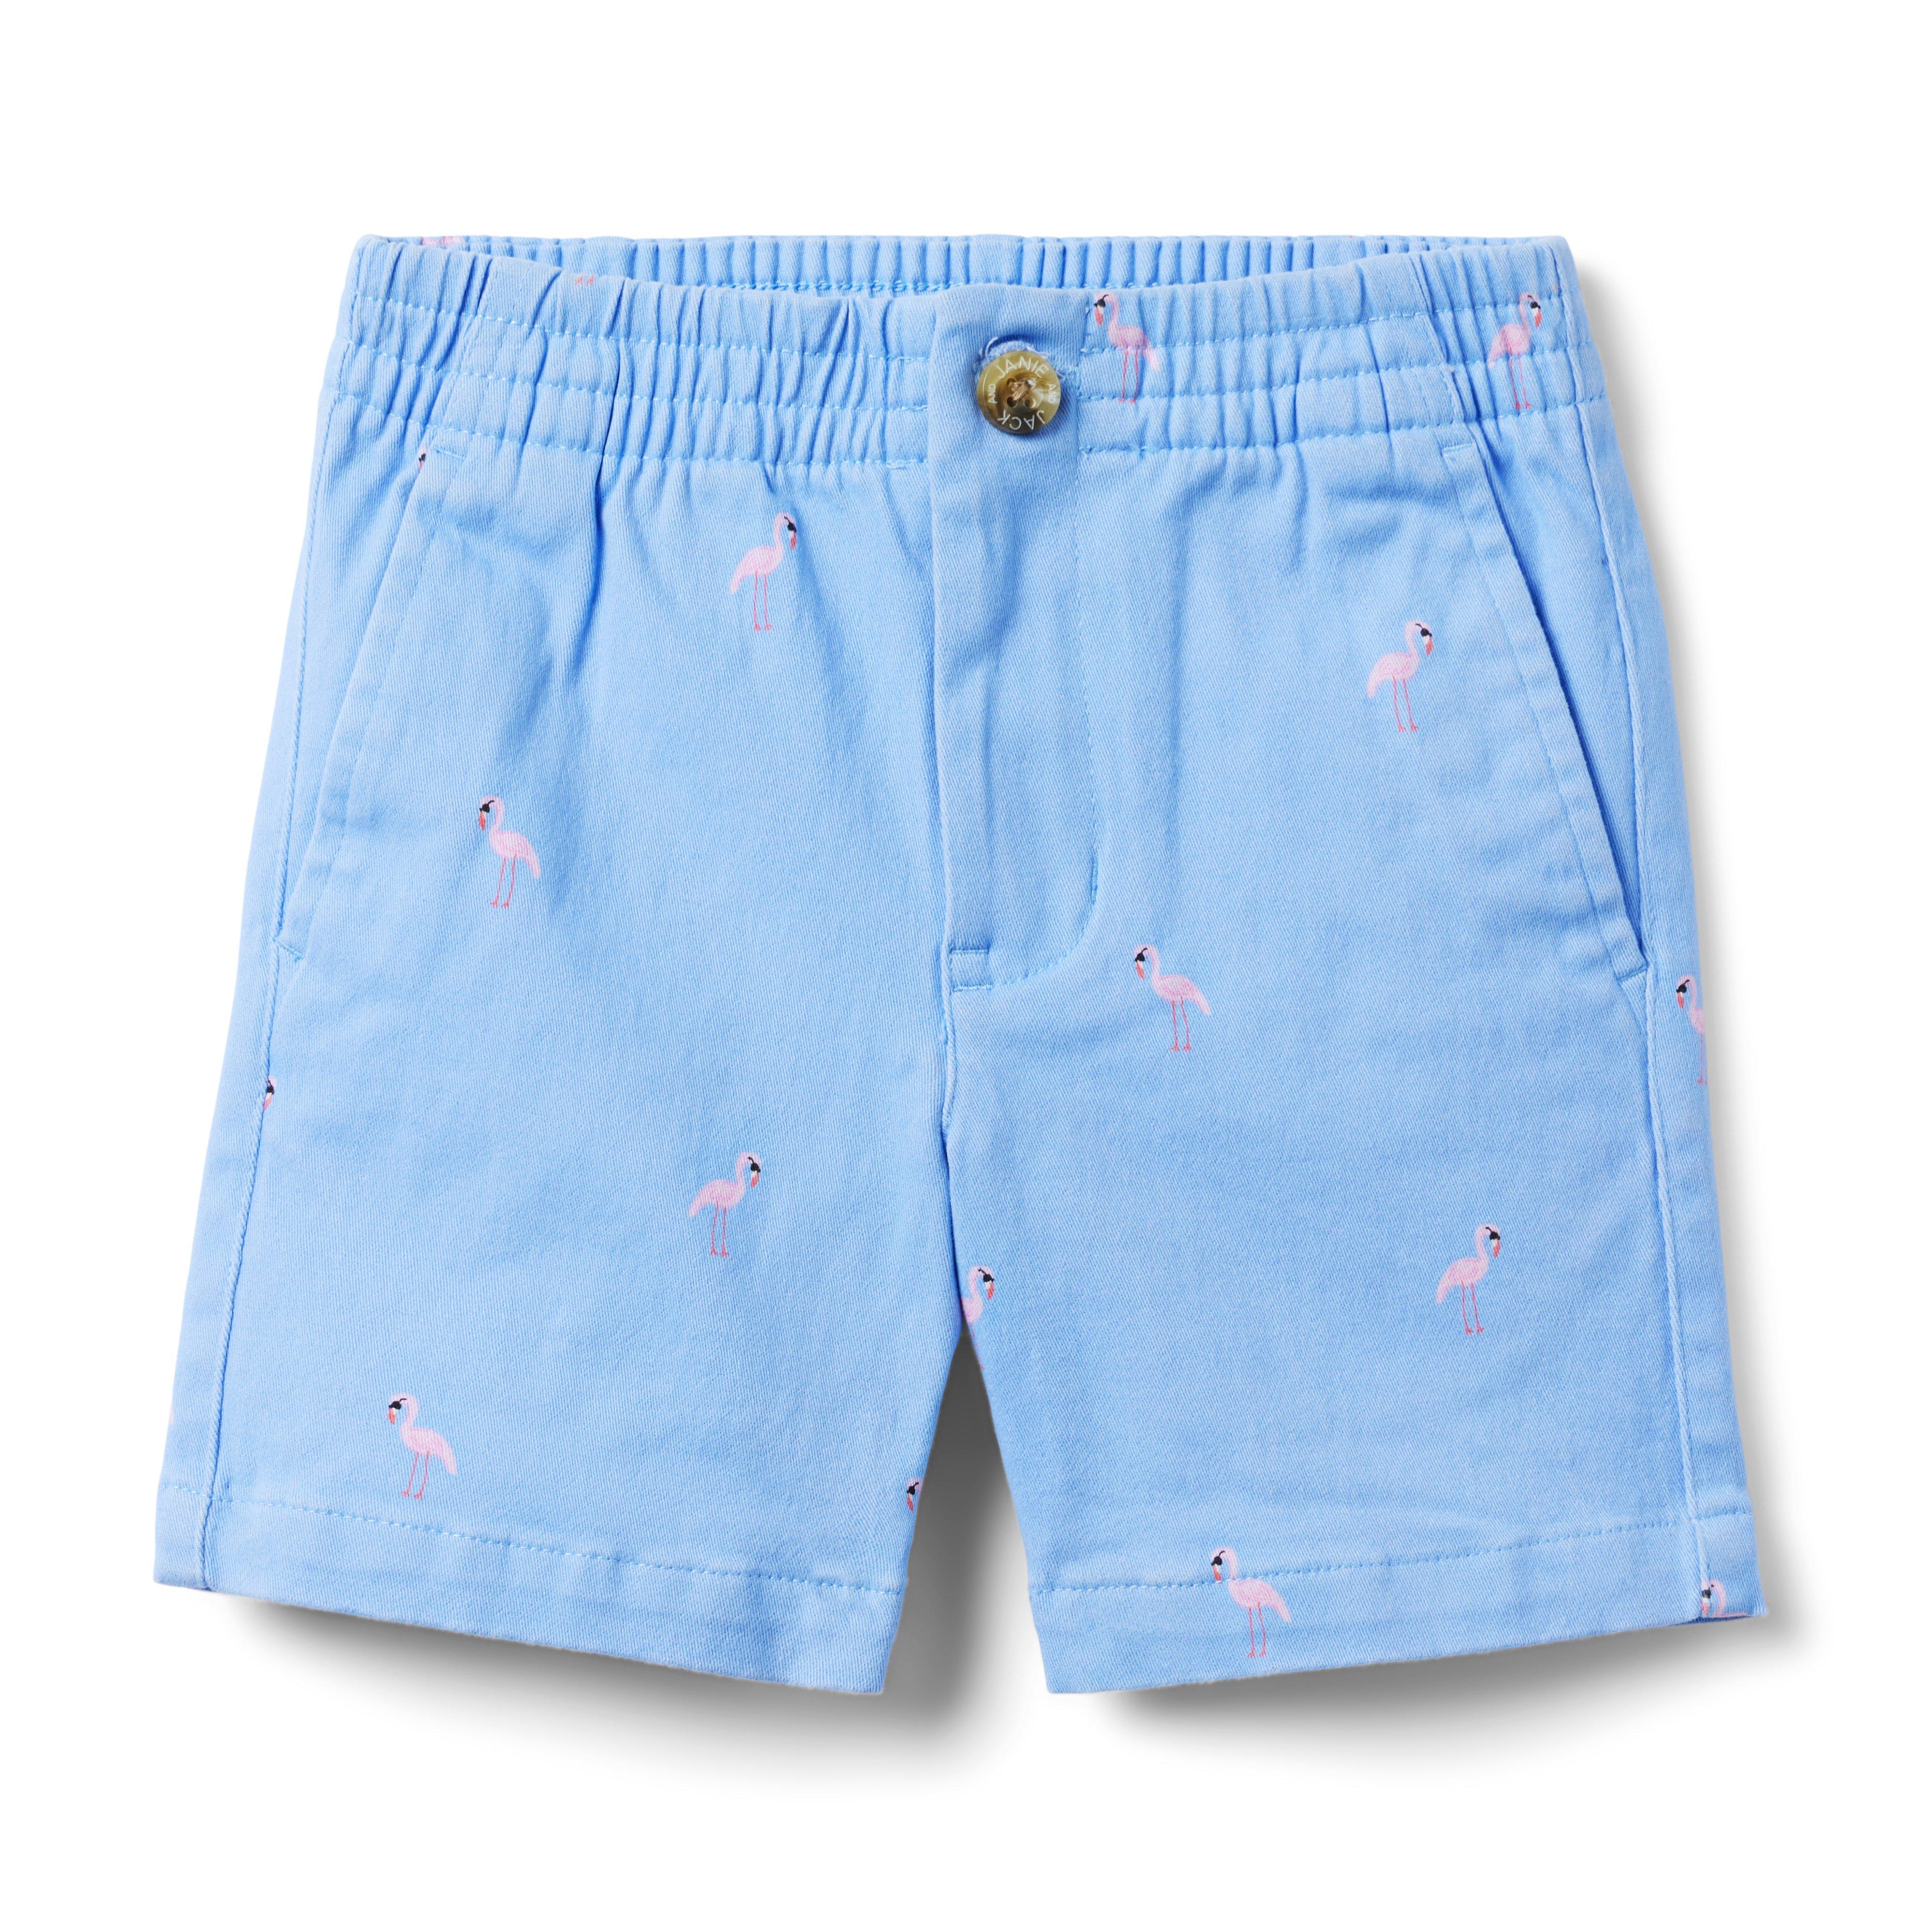 The Twill Embroidered Pull-On Short